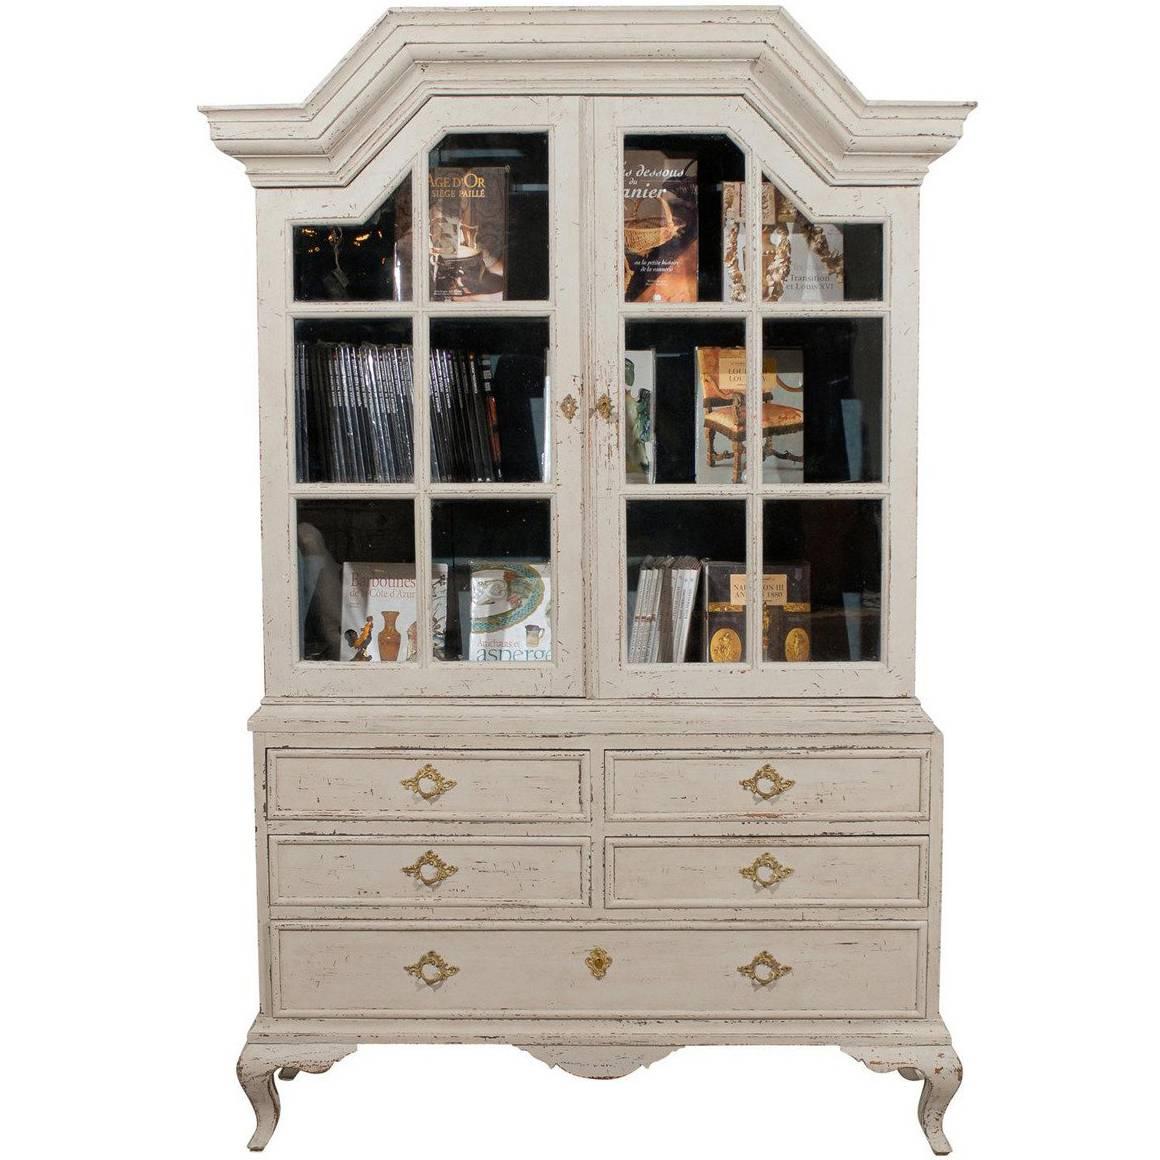 Swedish 1810 Baroque Painted Wood Cabinet with Glass Doors and Five Drawers